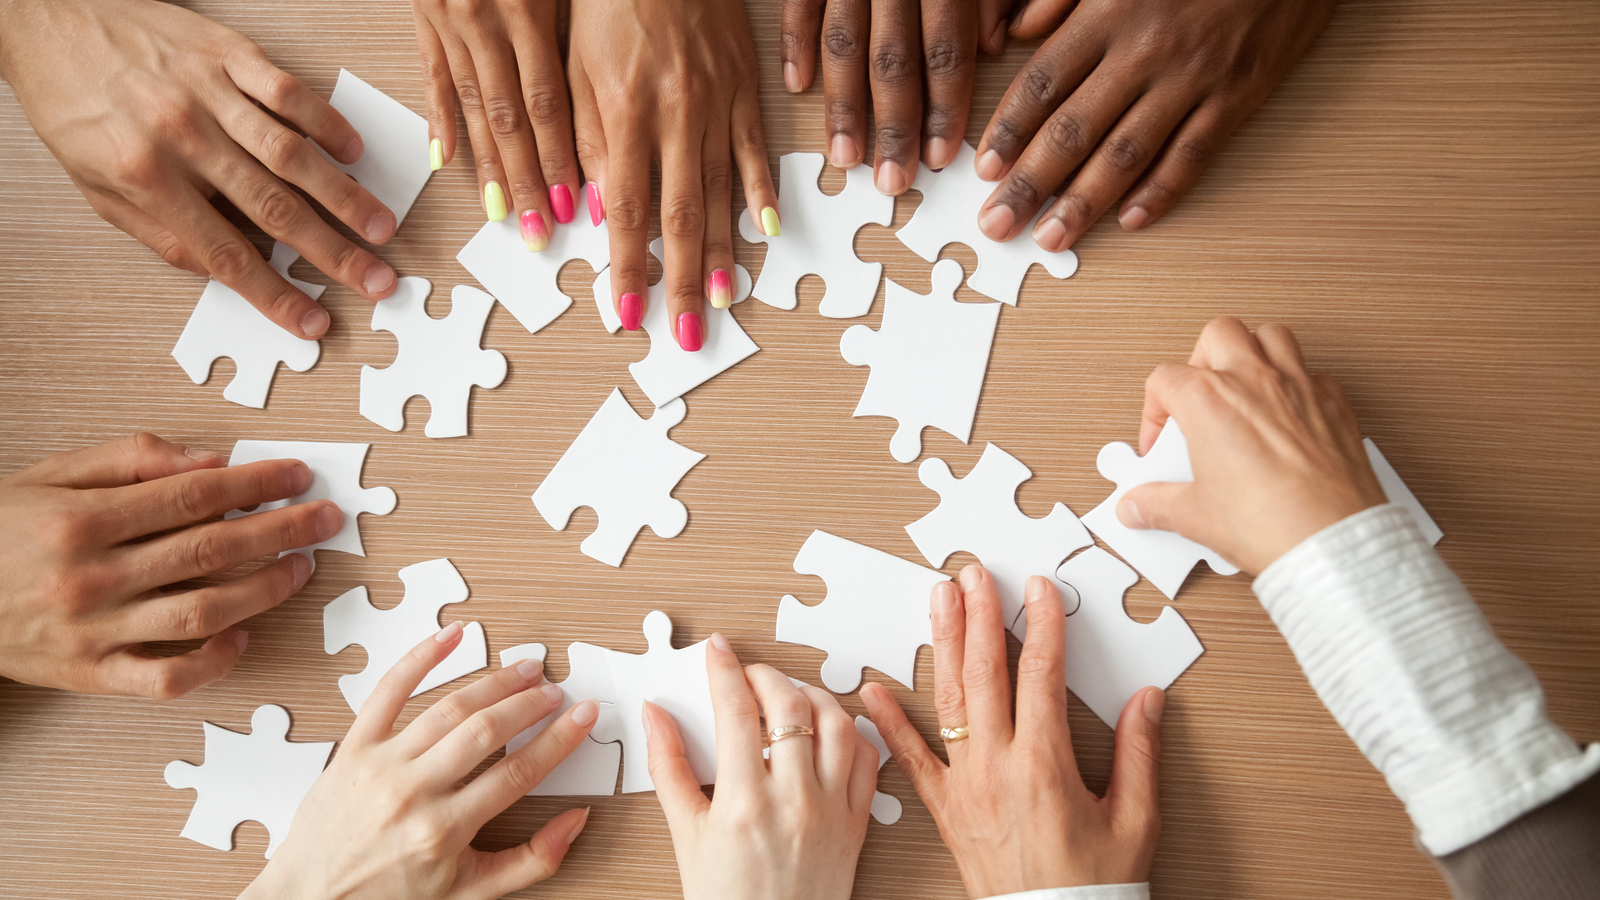 Hands of diverse people assembling jigsaw puzzle